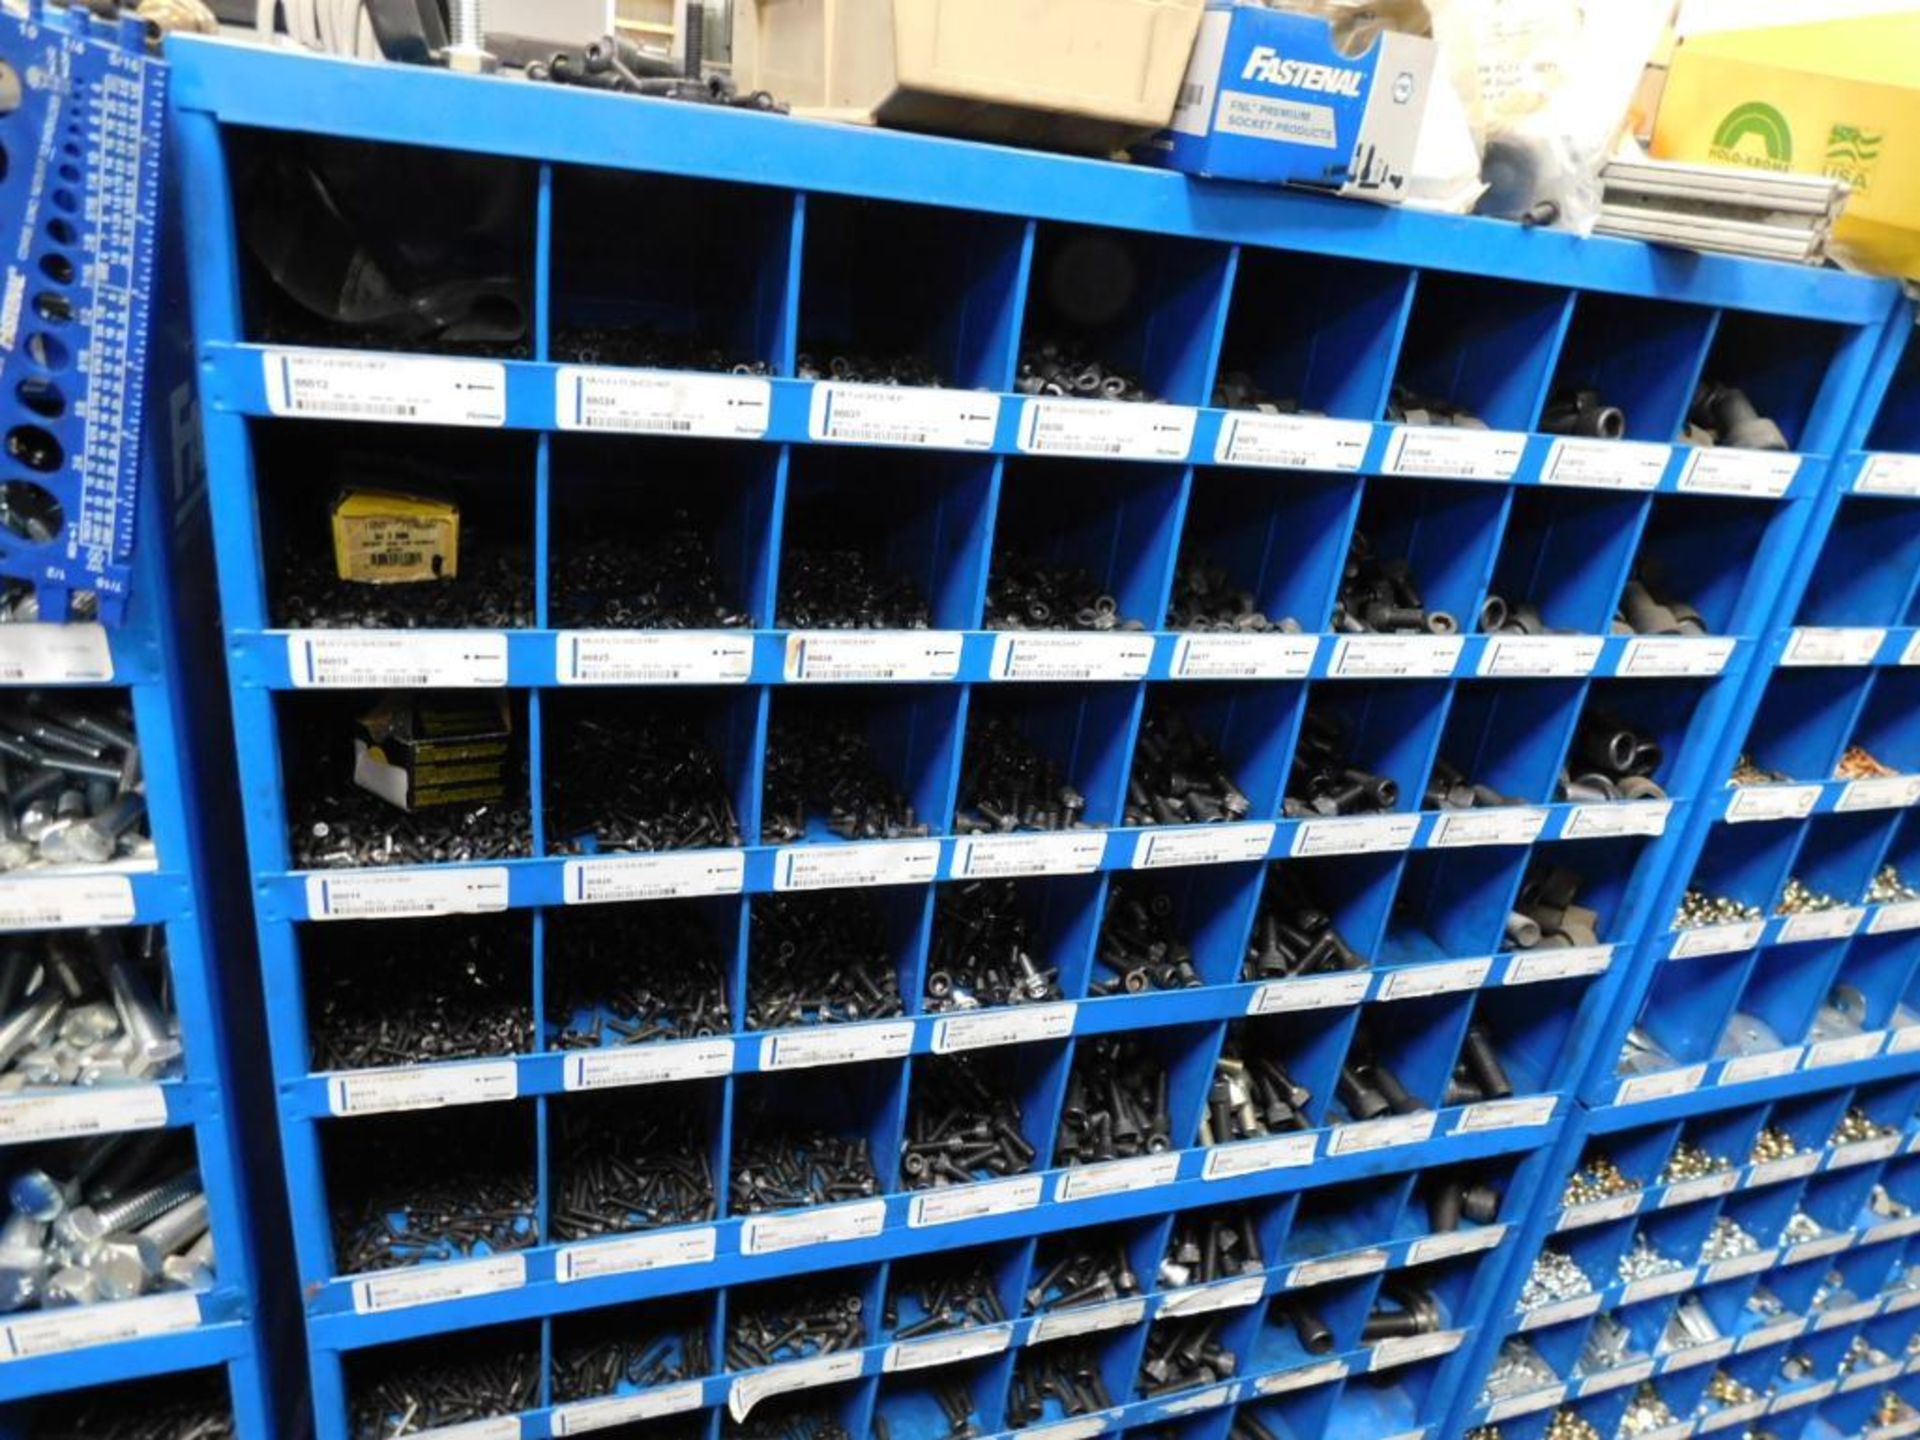 LOT: (5) Sections Fastenal Compartment Organizers w/Contents of Assorted Hardware, Bolts, Nuts, Wash - Image 4 of 11